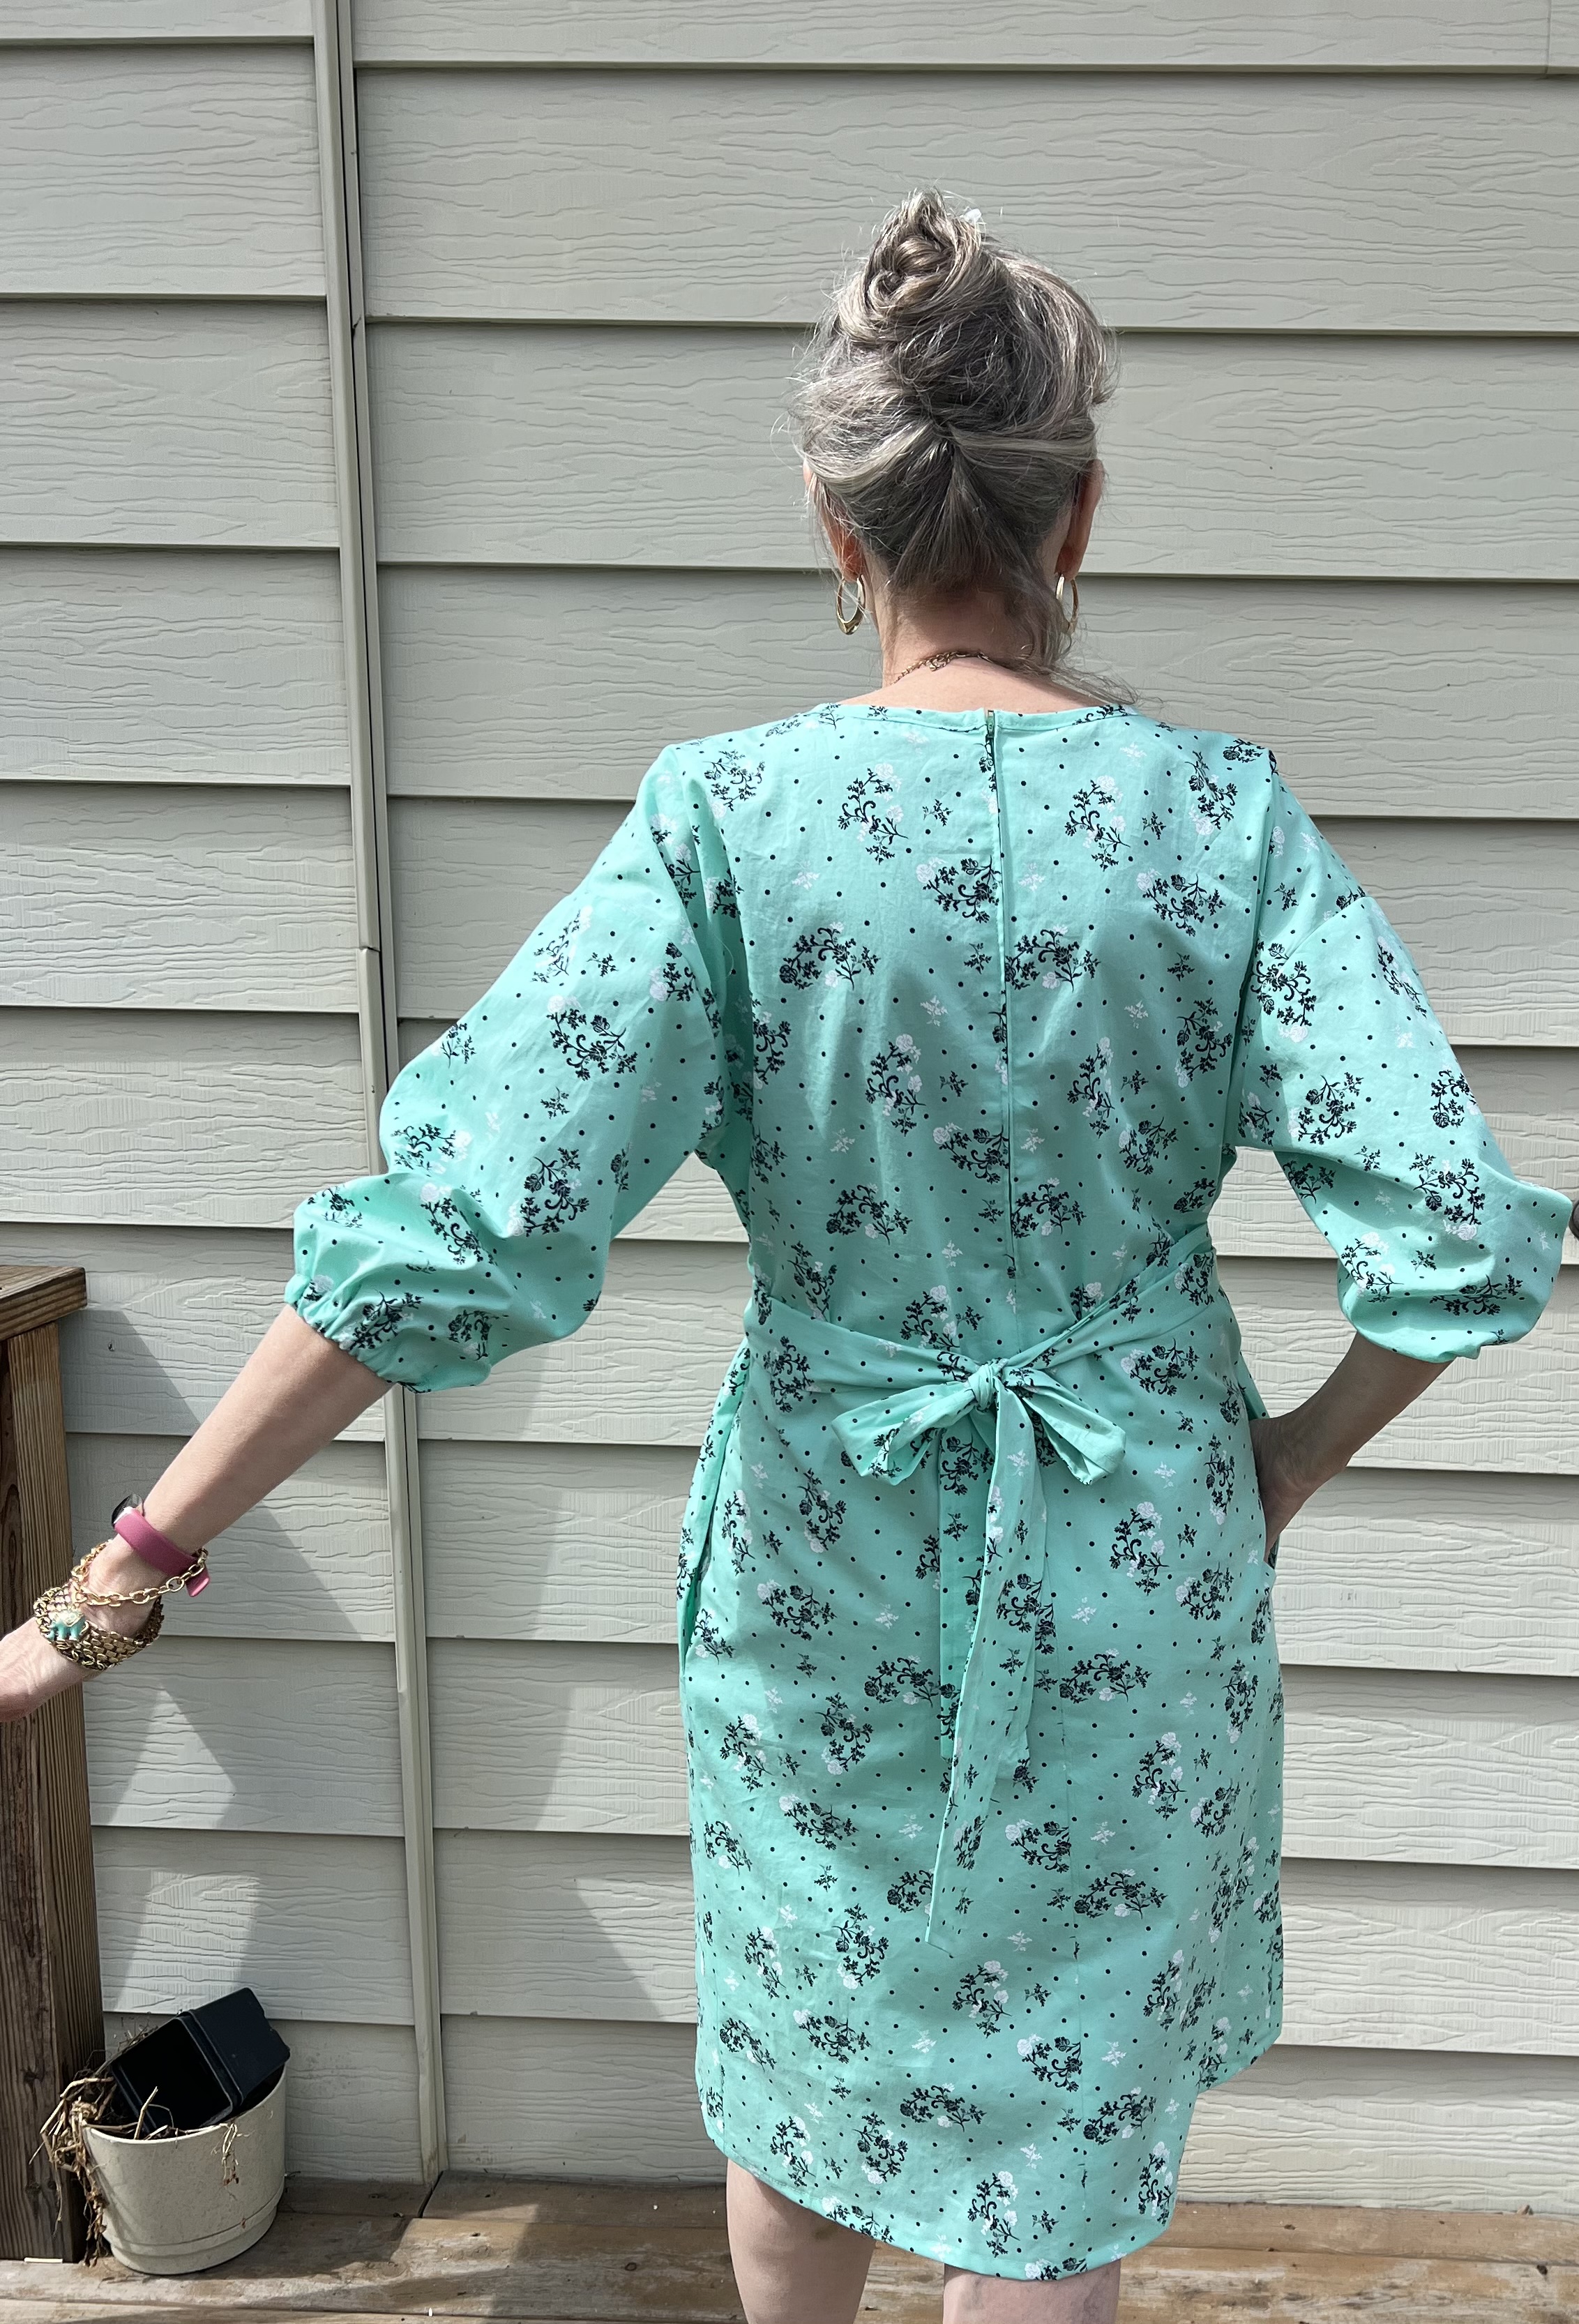 Azur shirt or dress sewing pattern paper version with free sew